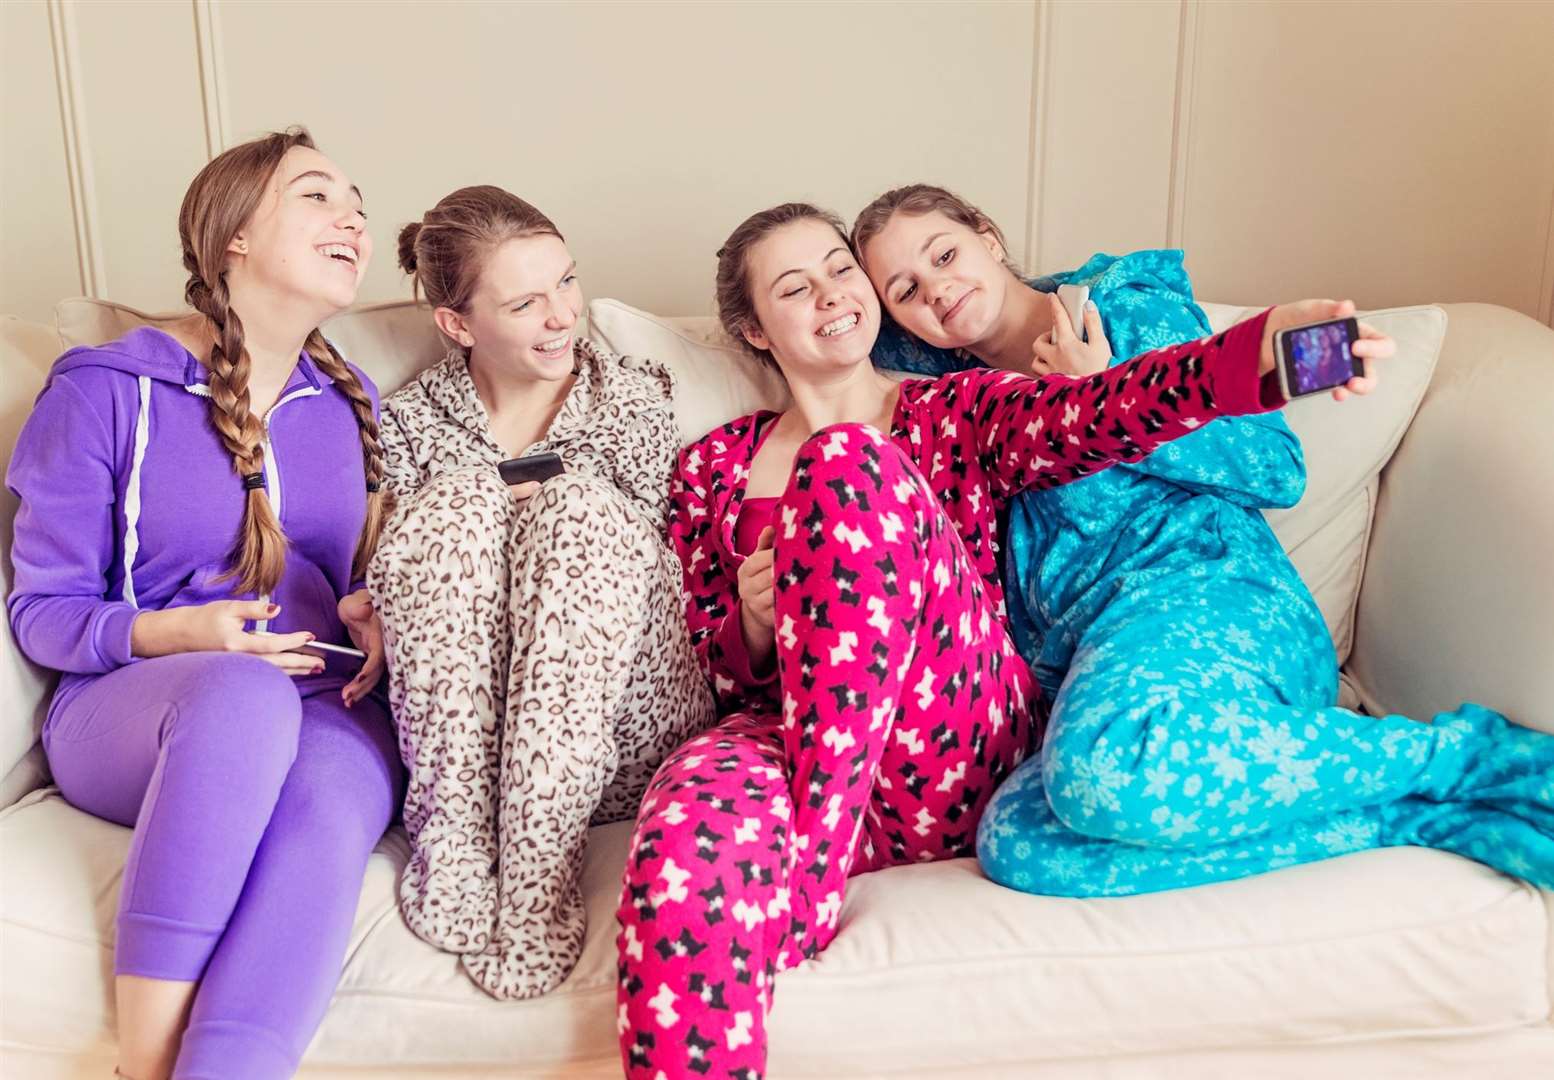 Many parents are concerned about their children’s consumption of social media. Image: iStock.